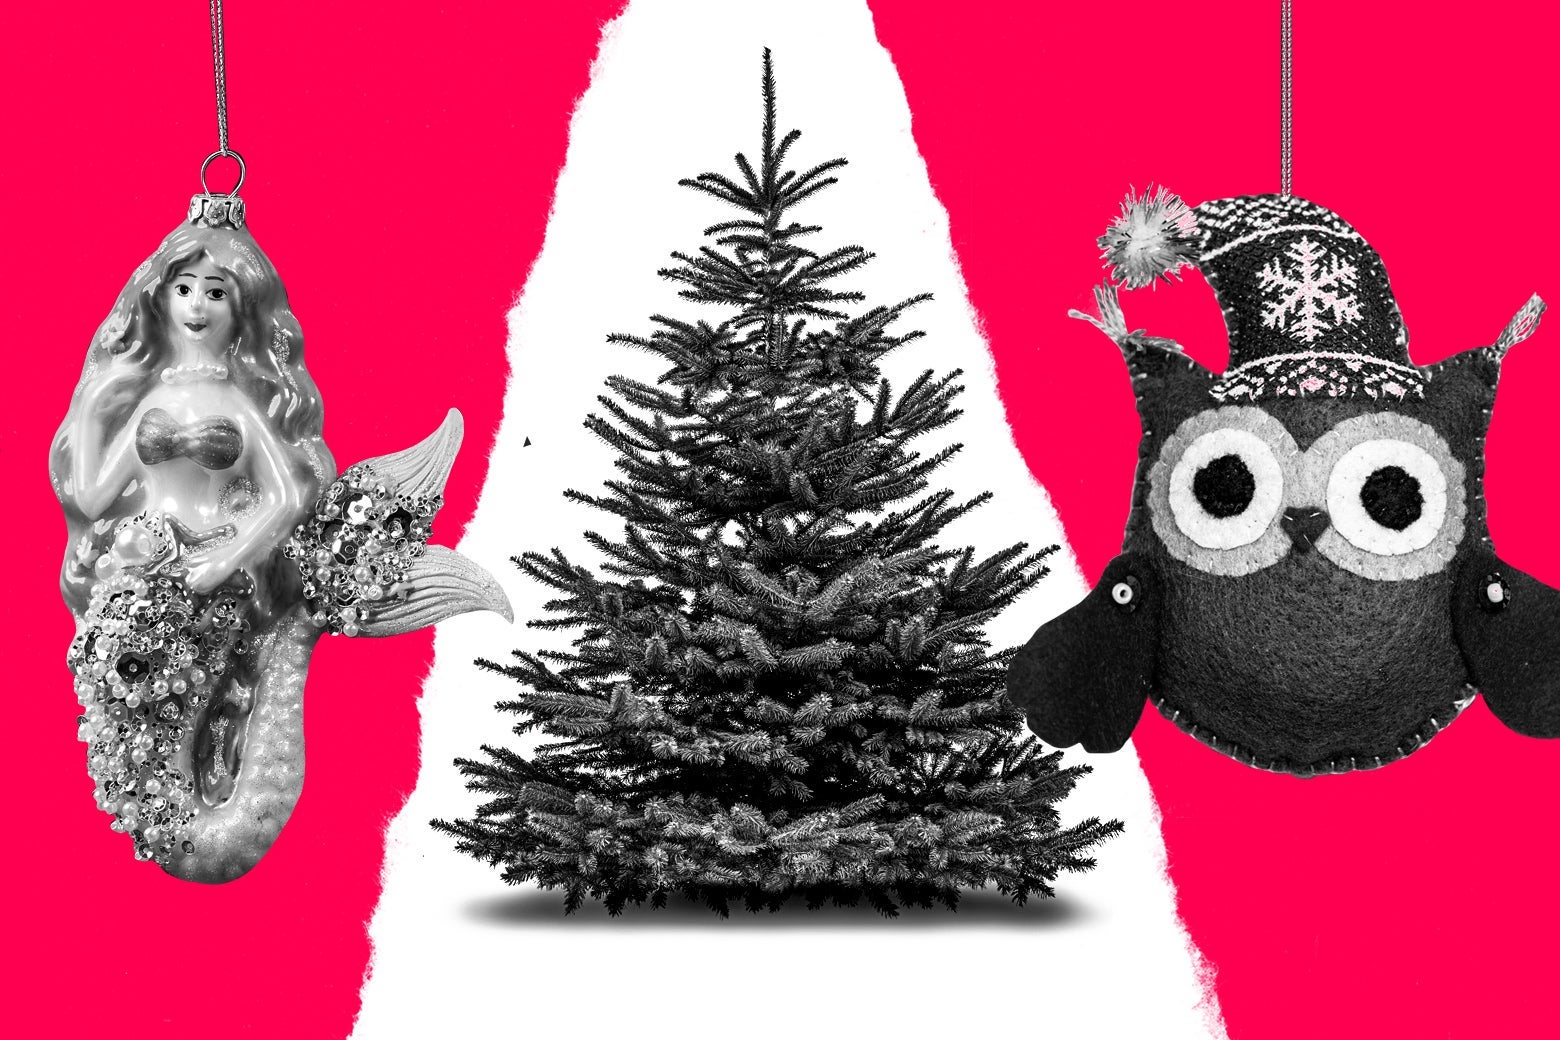 Photo illustration of a Christmas tree flanked by one mermaid ornament and one owl ornament.